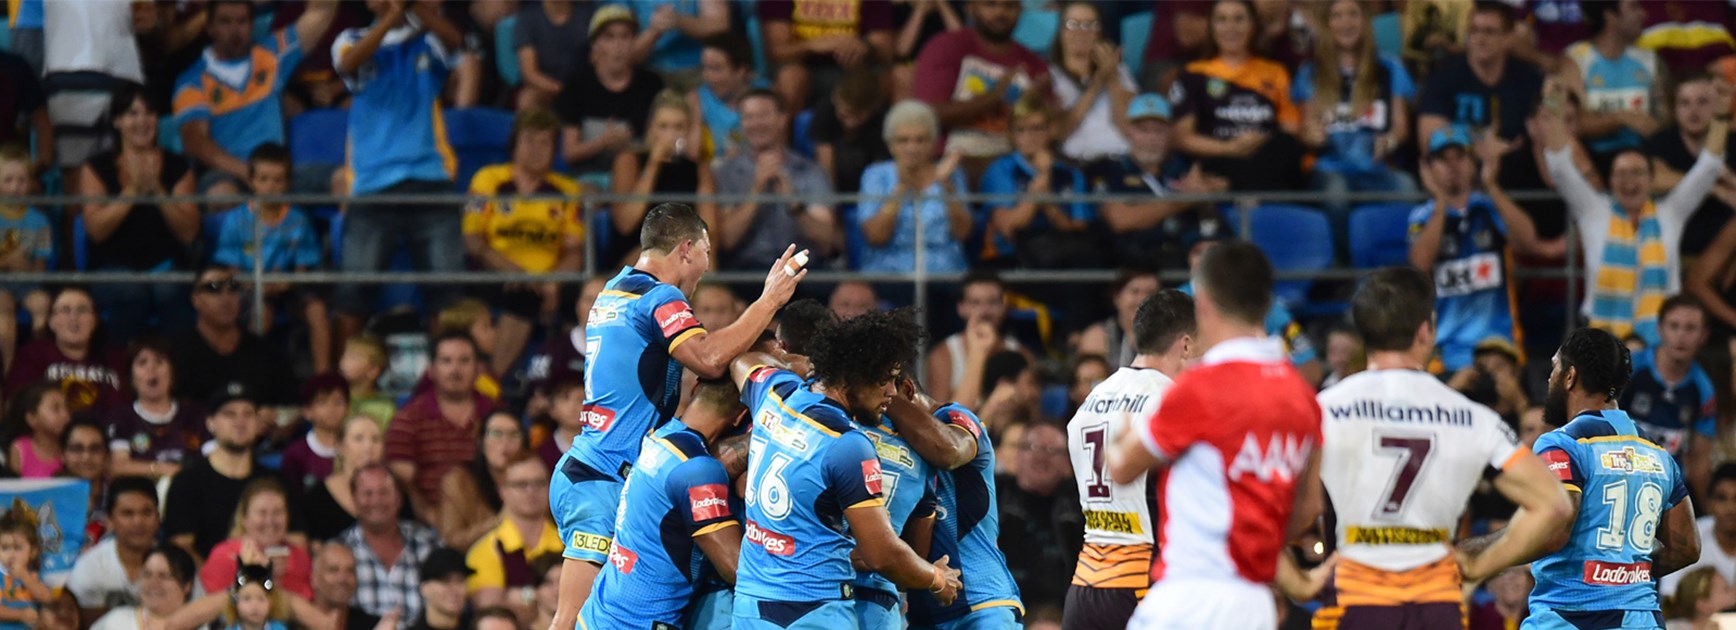 The Gold Coast Titans have exceeded expectations in the early stages of the season.